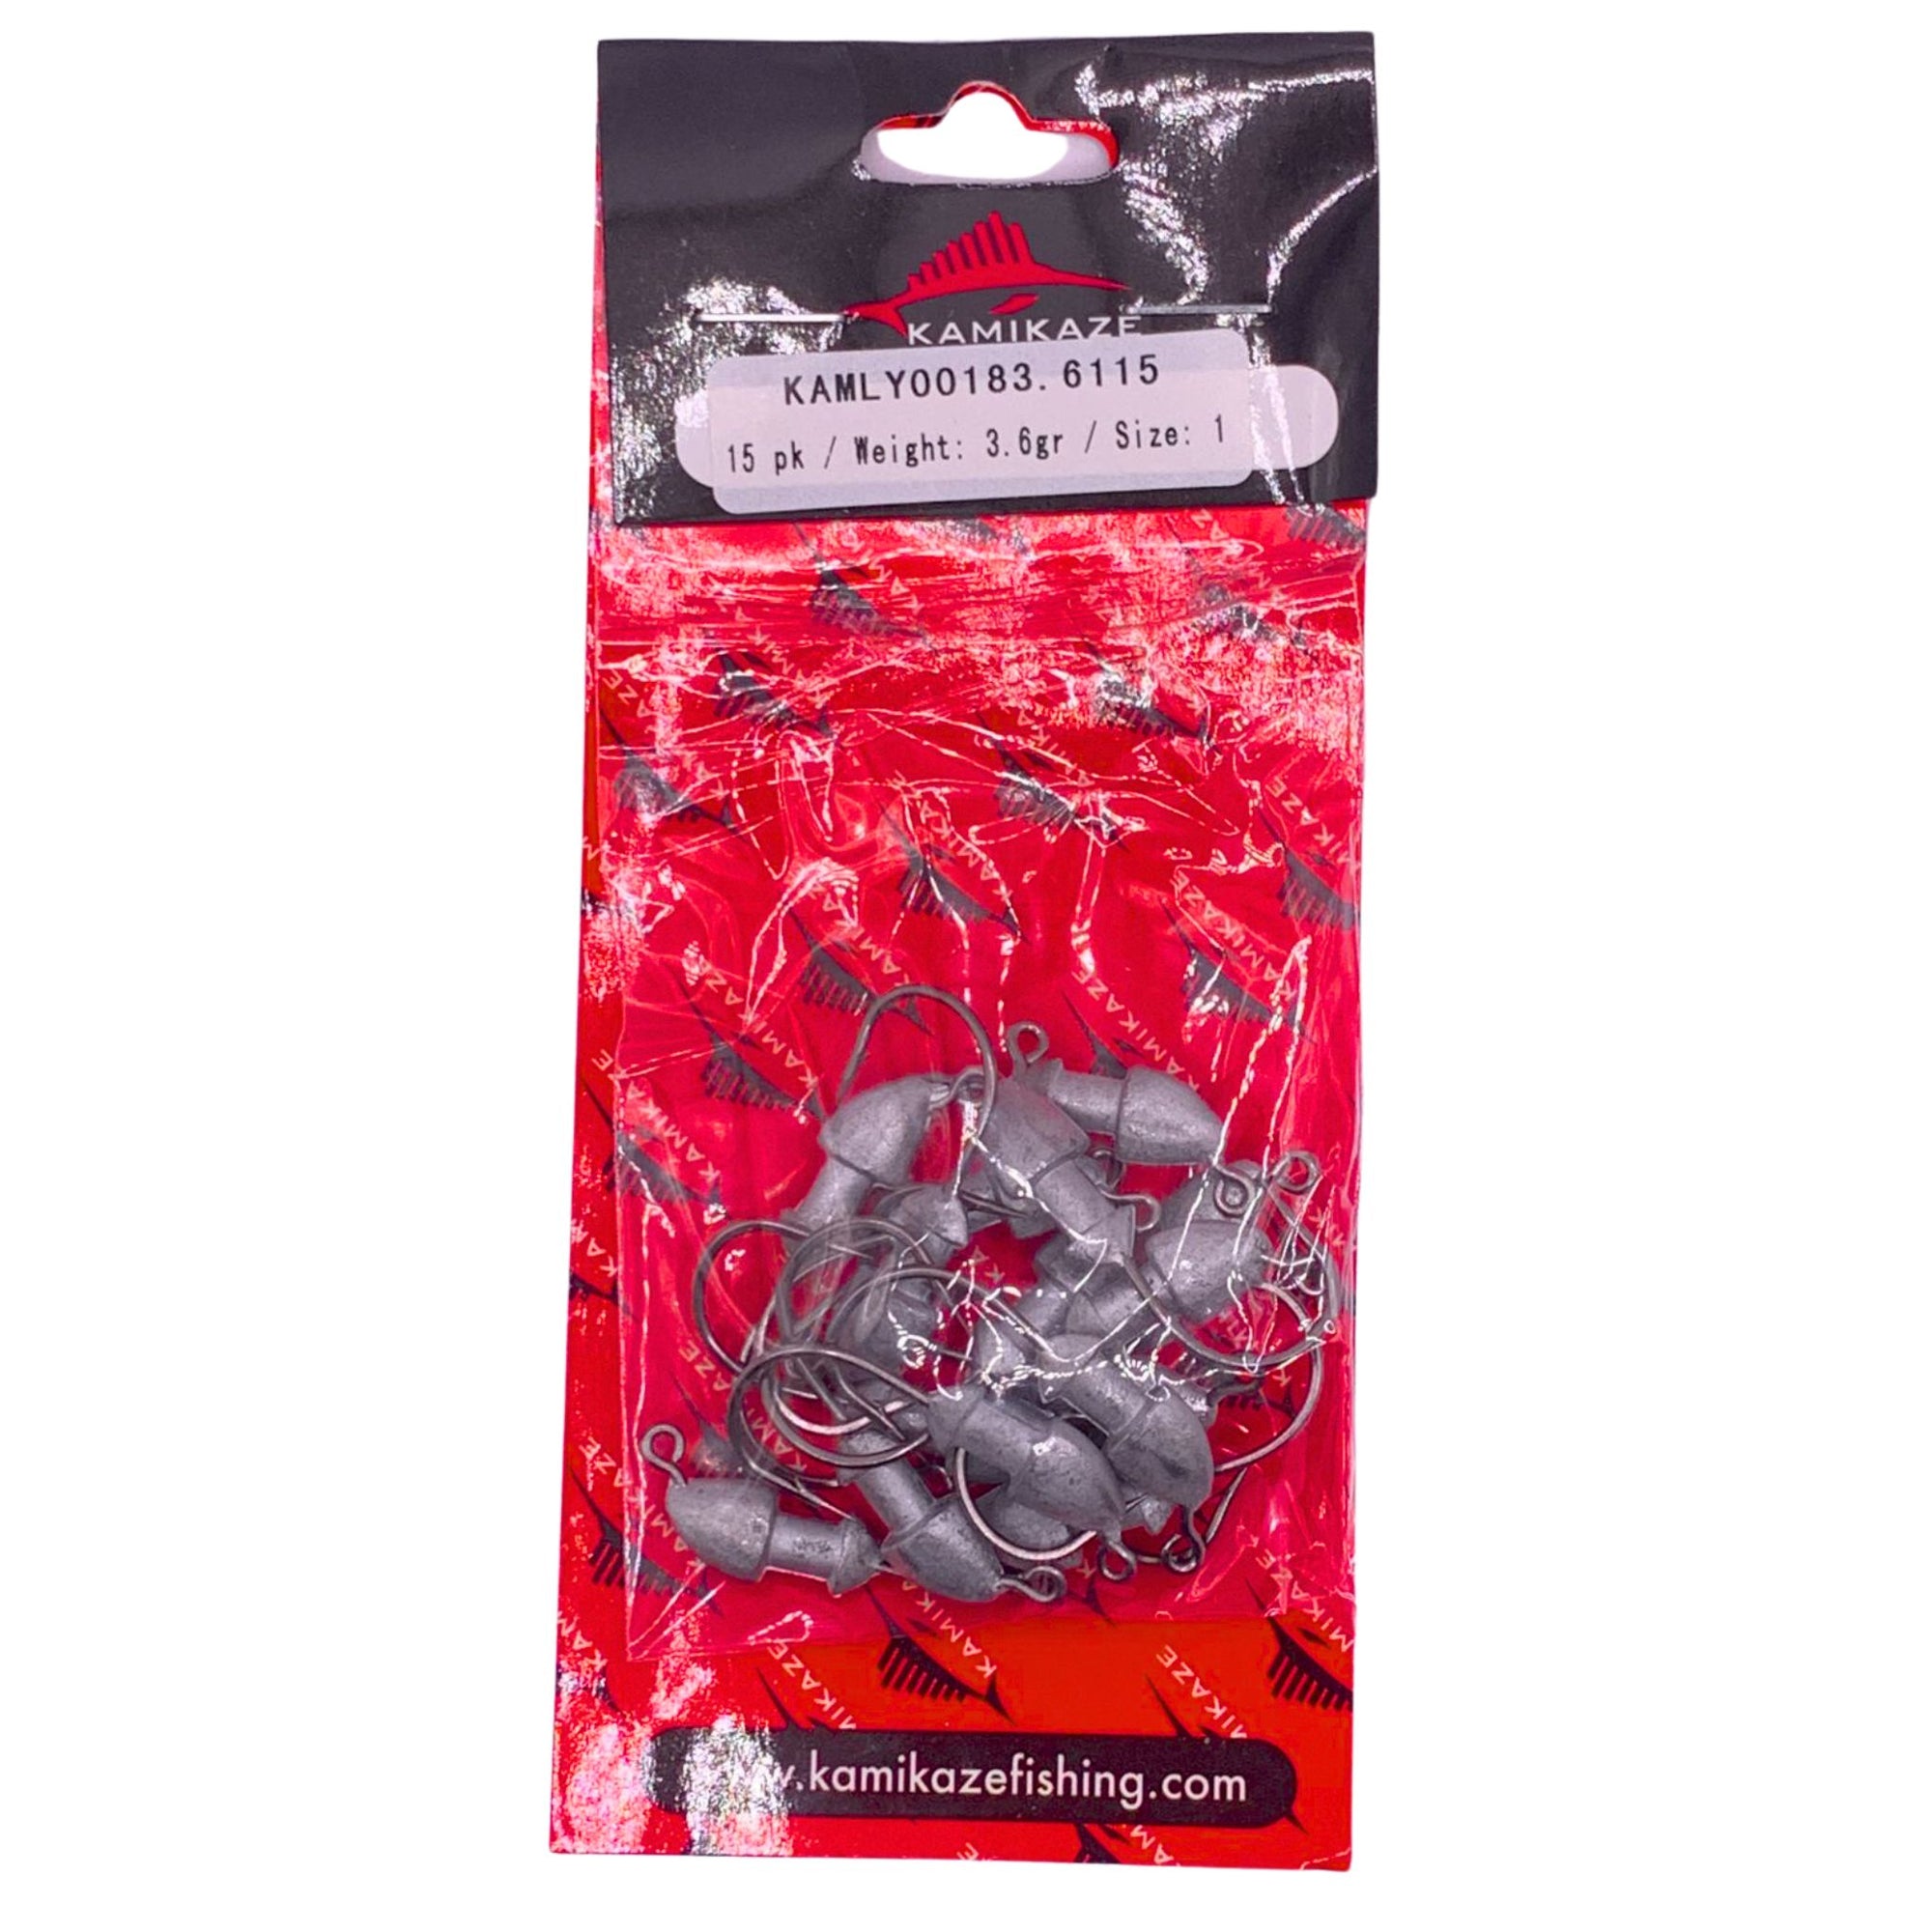 Jig Heads | Weight 3.6grams | Size: 1 | Pack of 15 - South East Clearance Centre